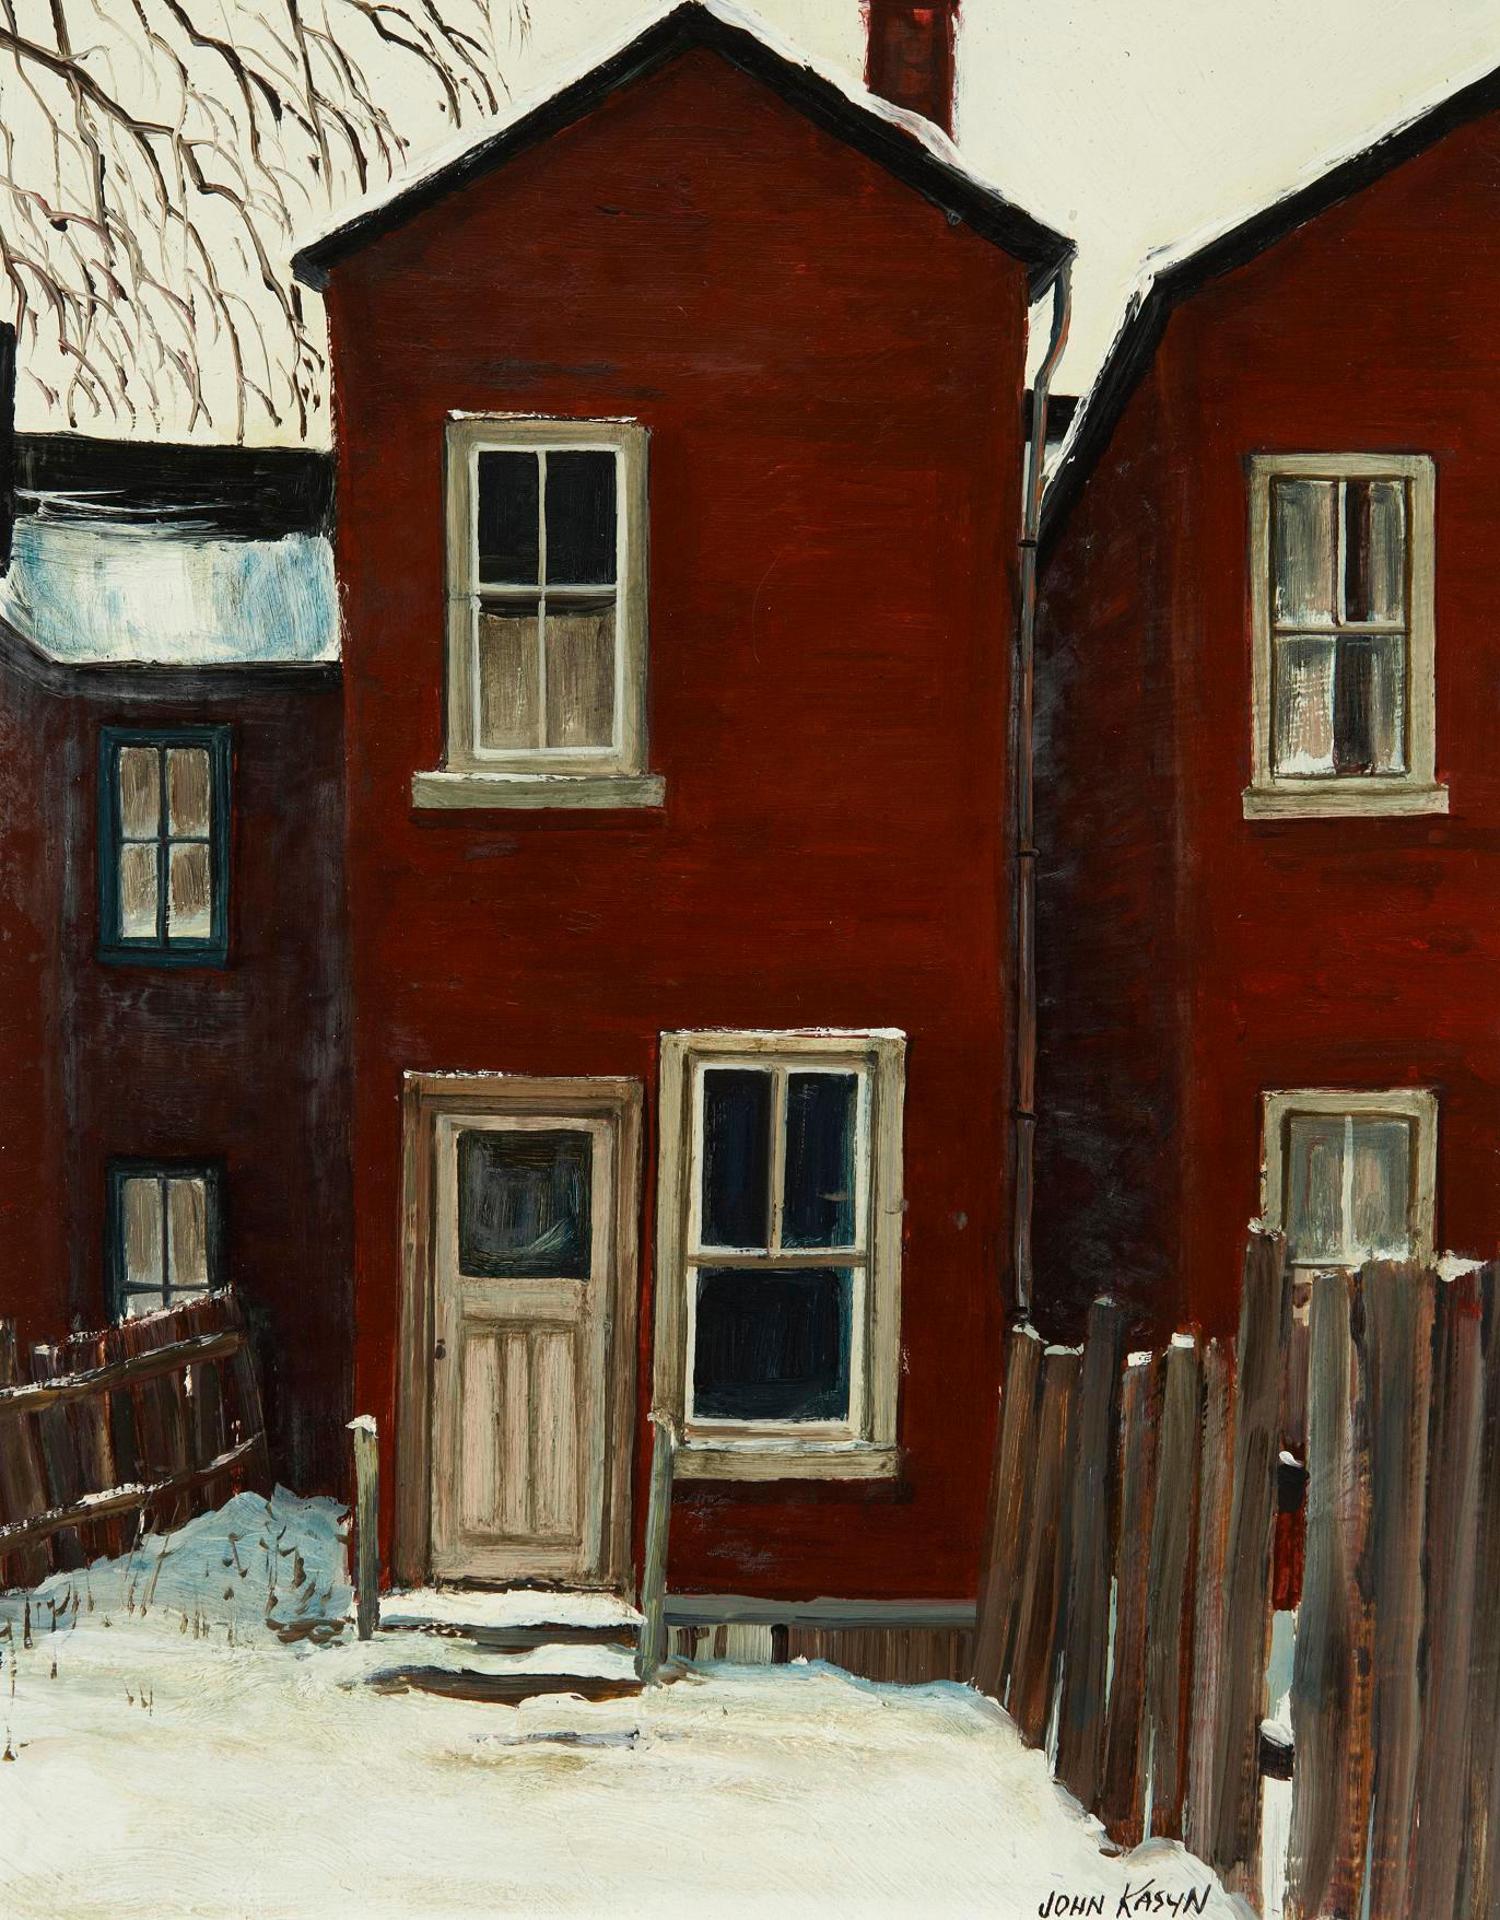 John Kasyn (1926-2008) - End of Bright Alley and Old House on Grange Ave.